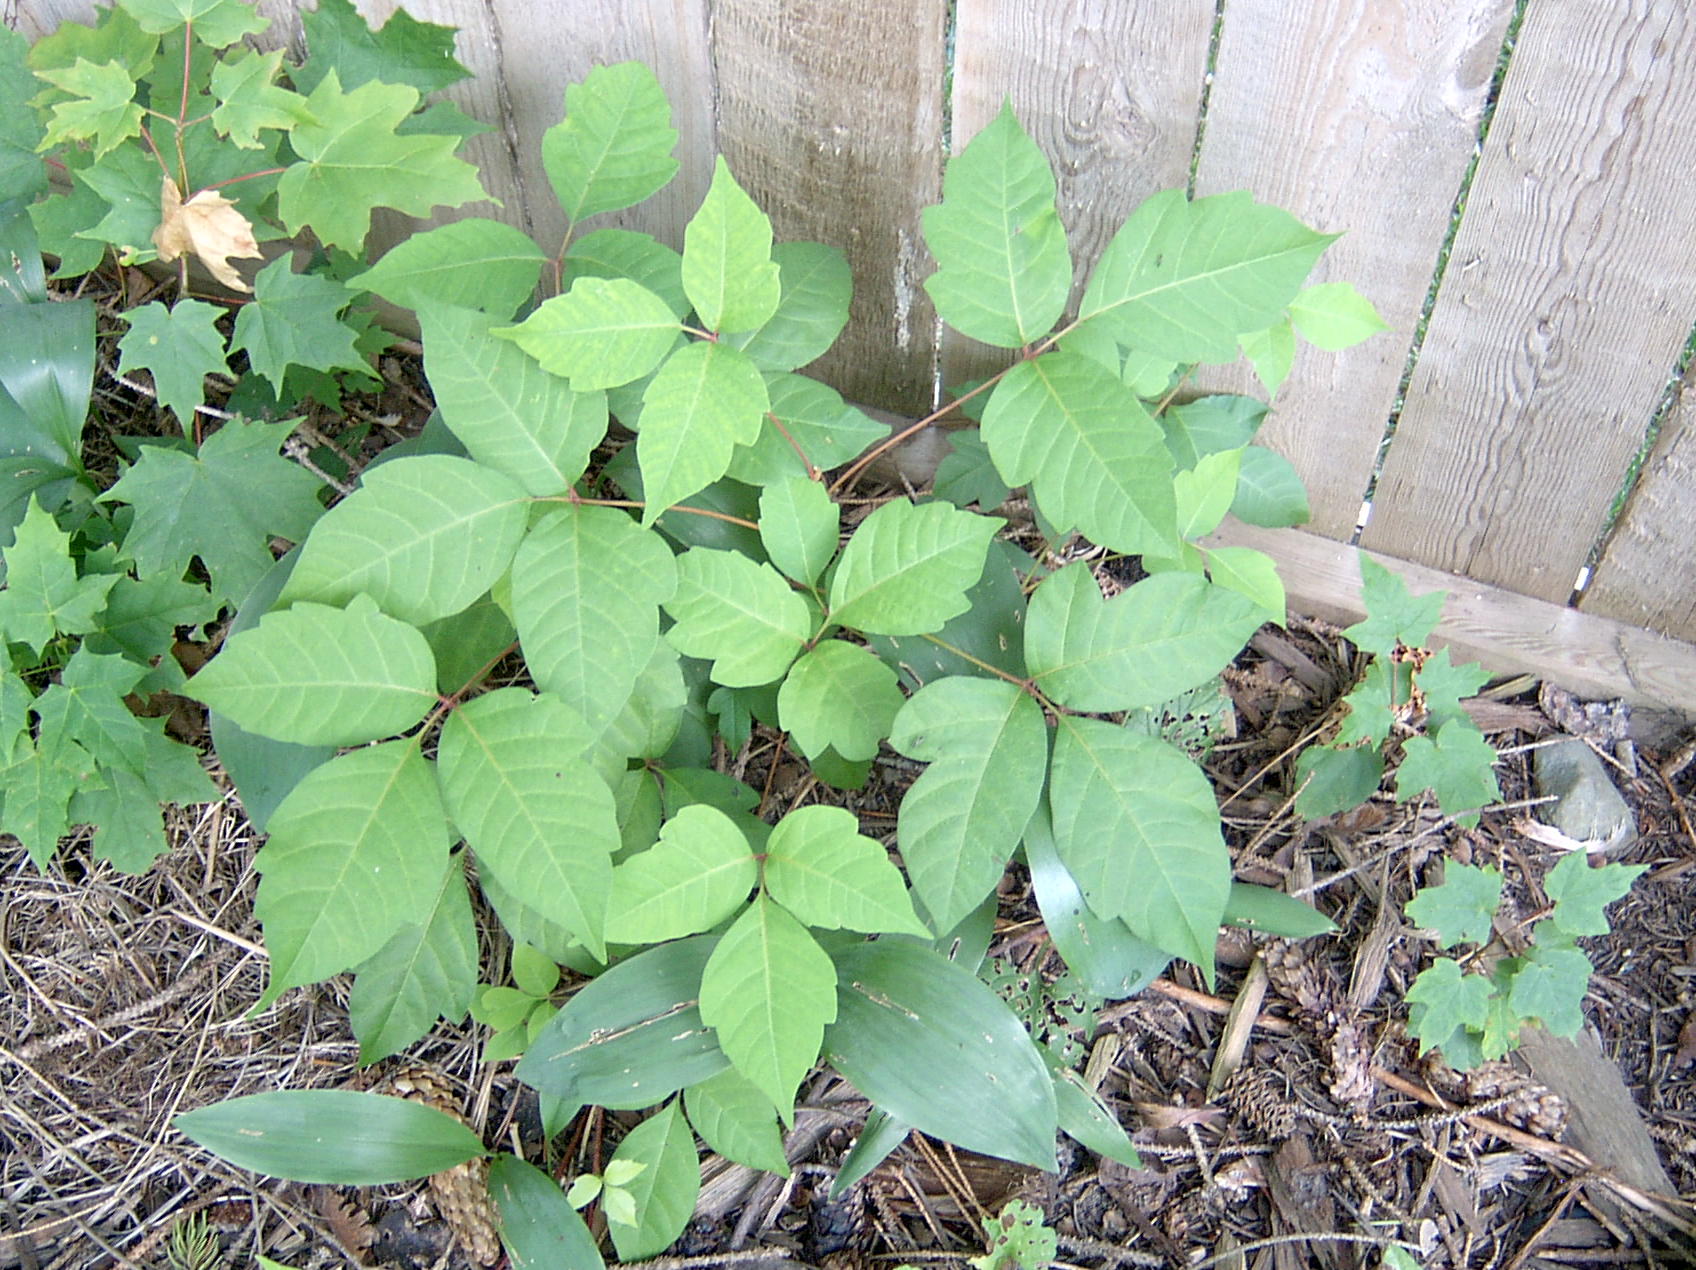 Poison ivy leaves grow in groups of three. (Photo: Michigan State University)